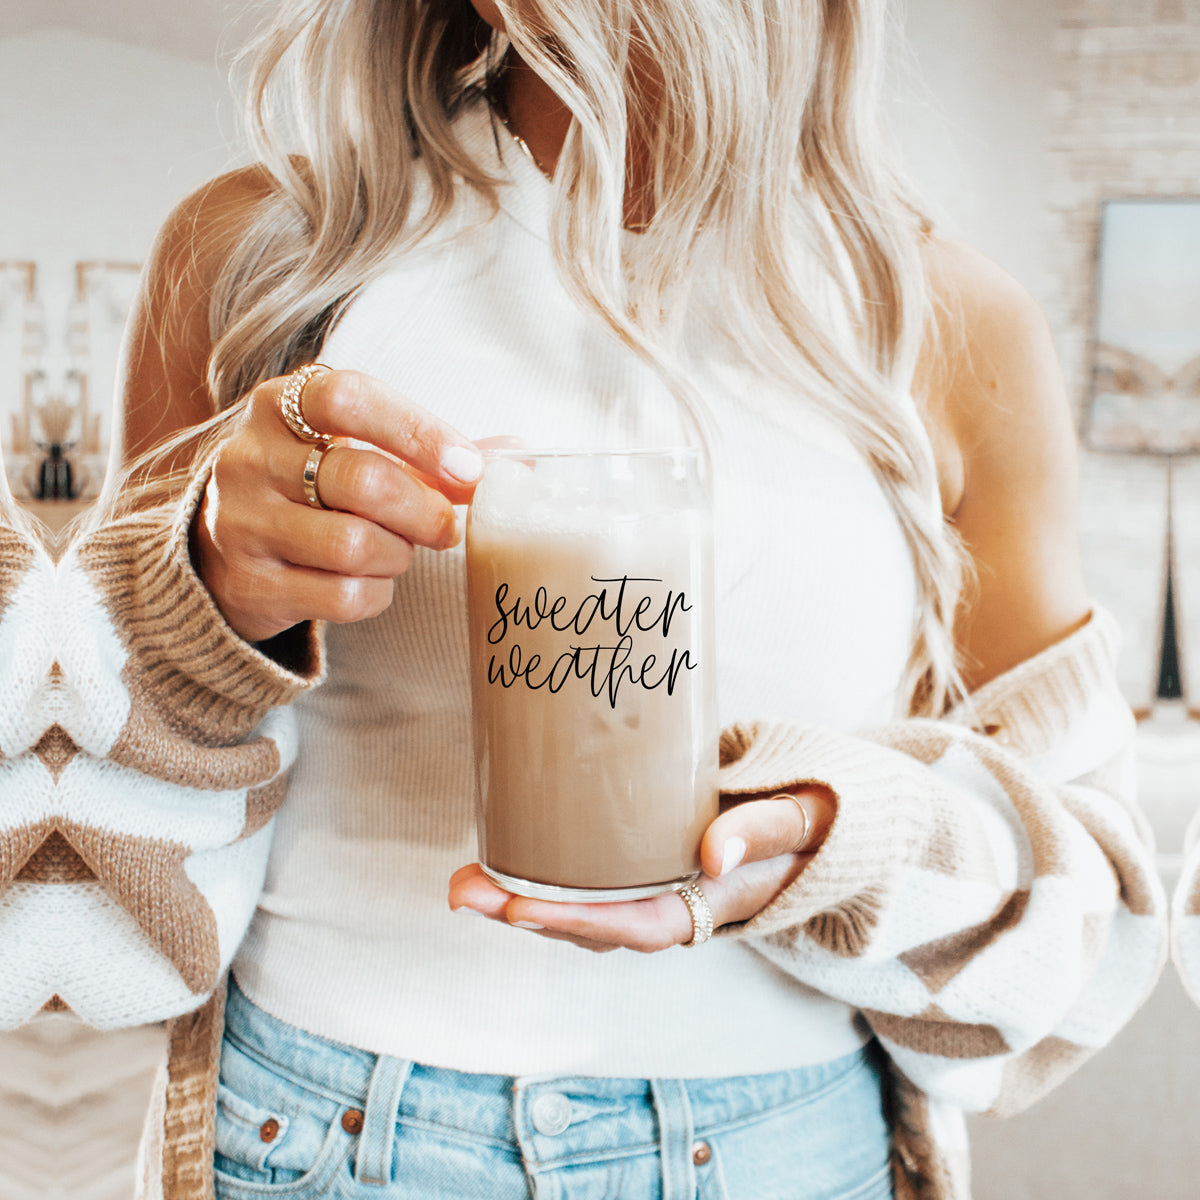 Sweater Weather Cup